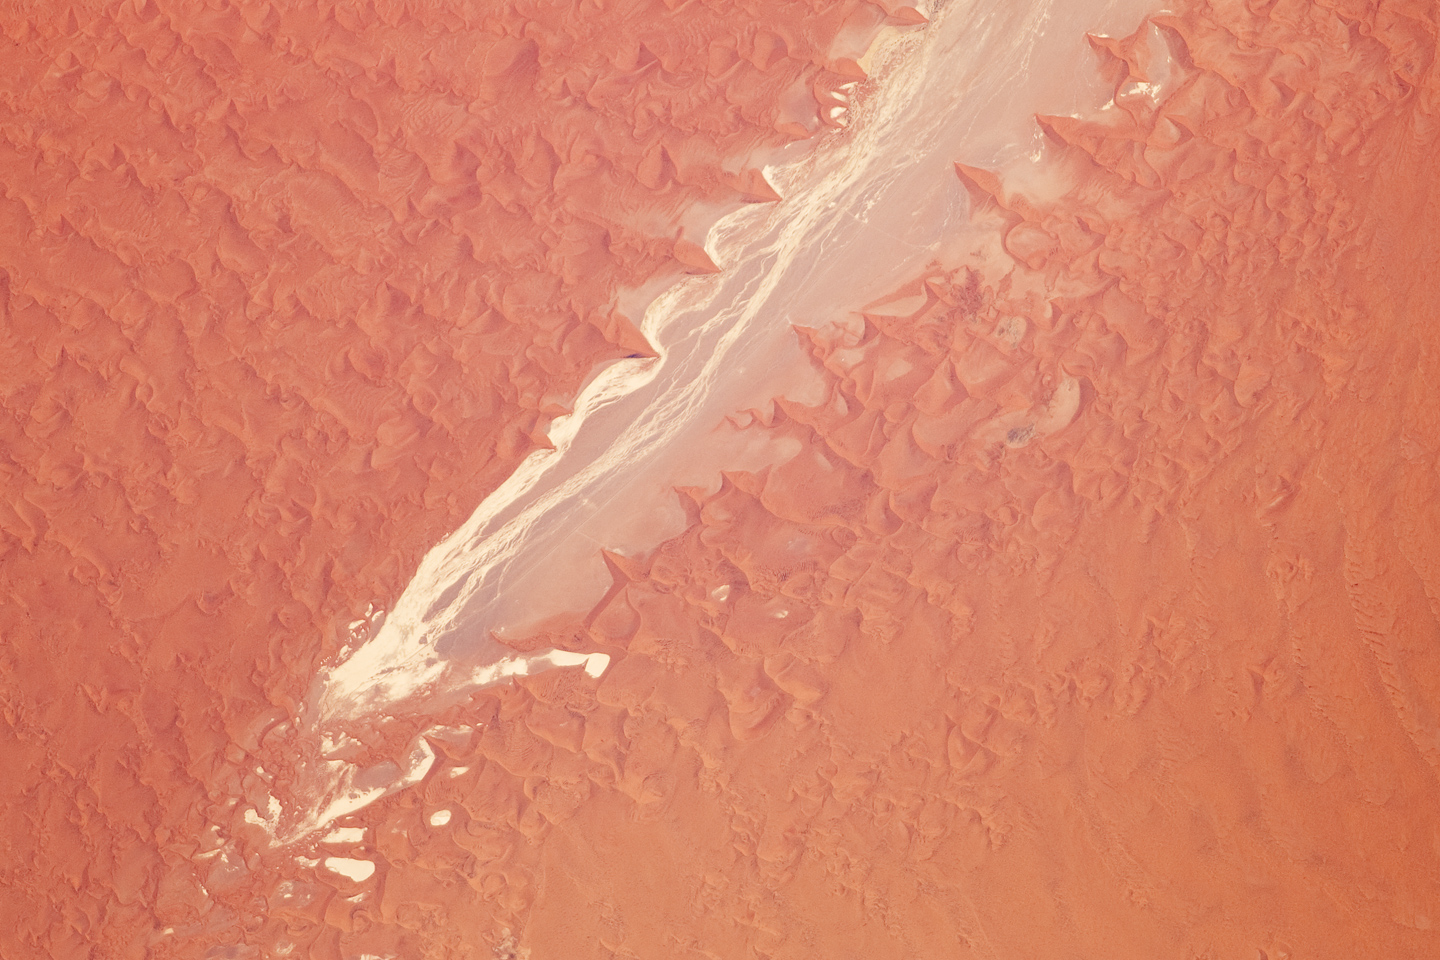 Tsauchab River and Sossus Vlei Lakebed, Namibia - related image preview